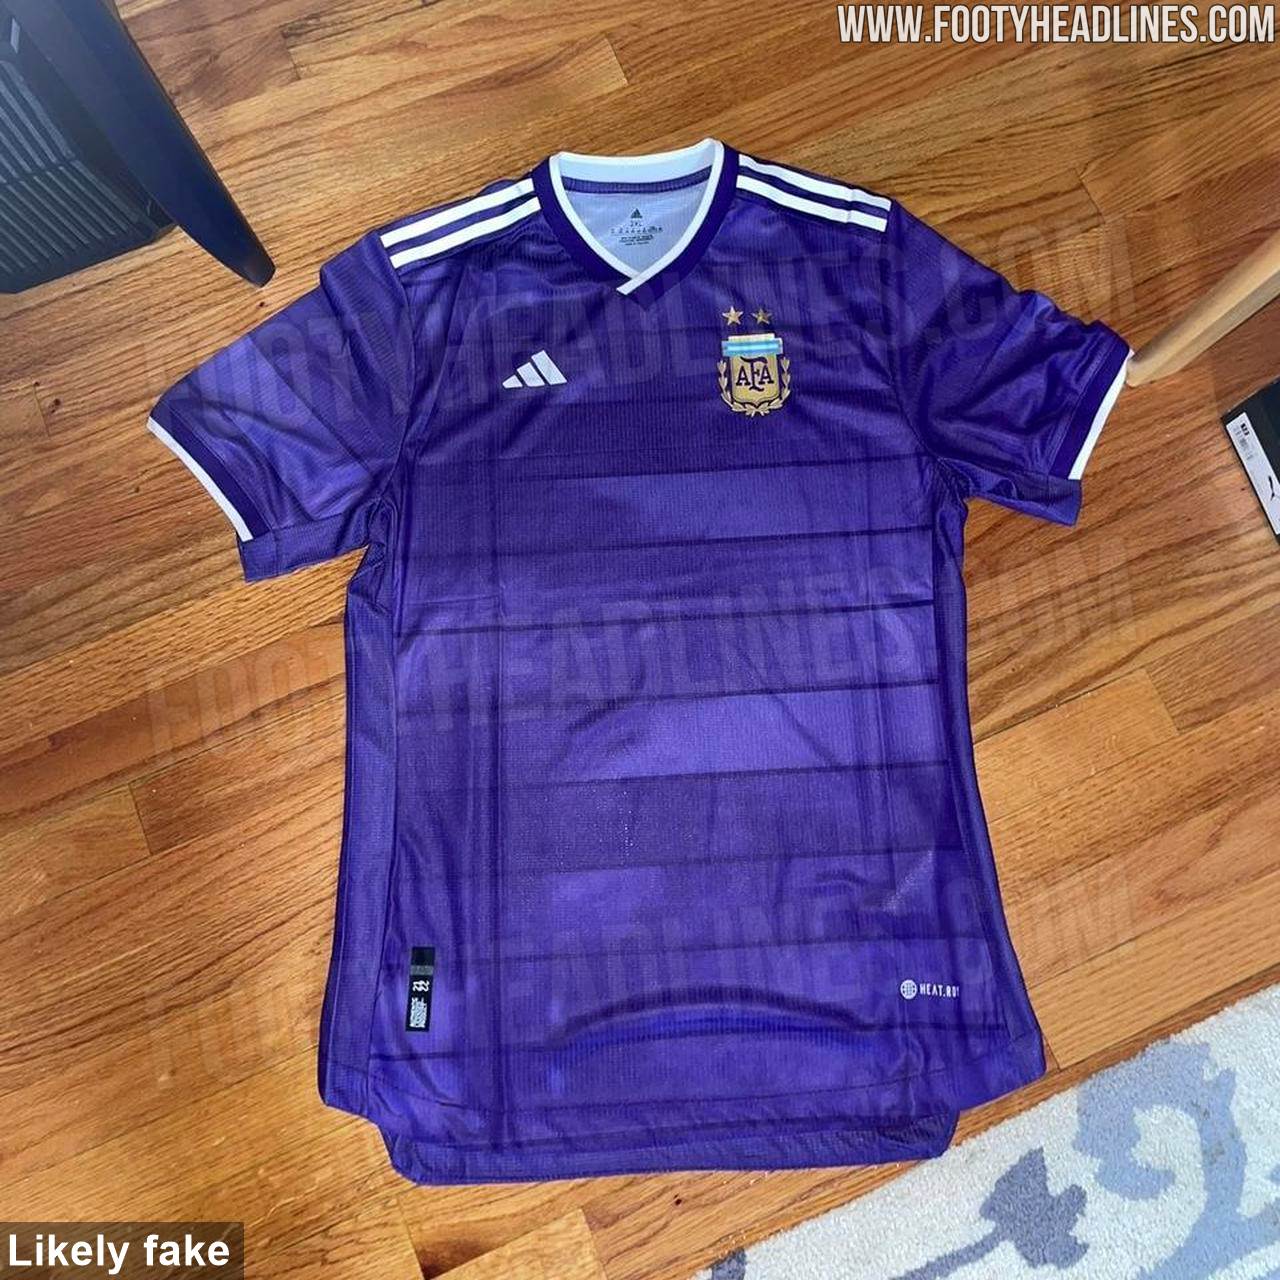 Unique Adidas Argentina 2018 World Cup Mash-Up Jersey Leaked - Footy  Headlines